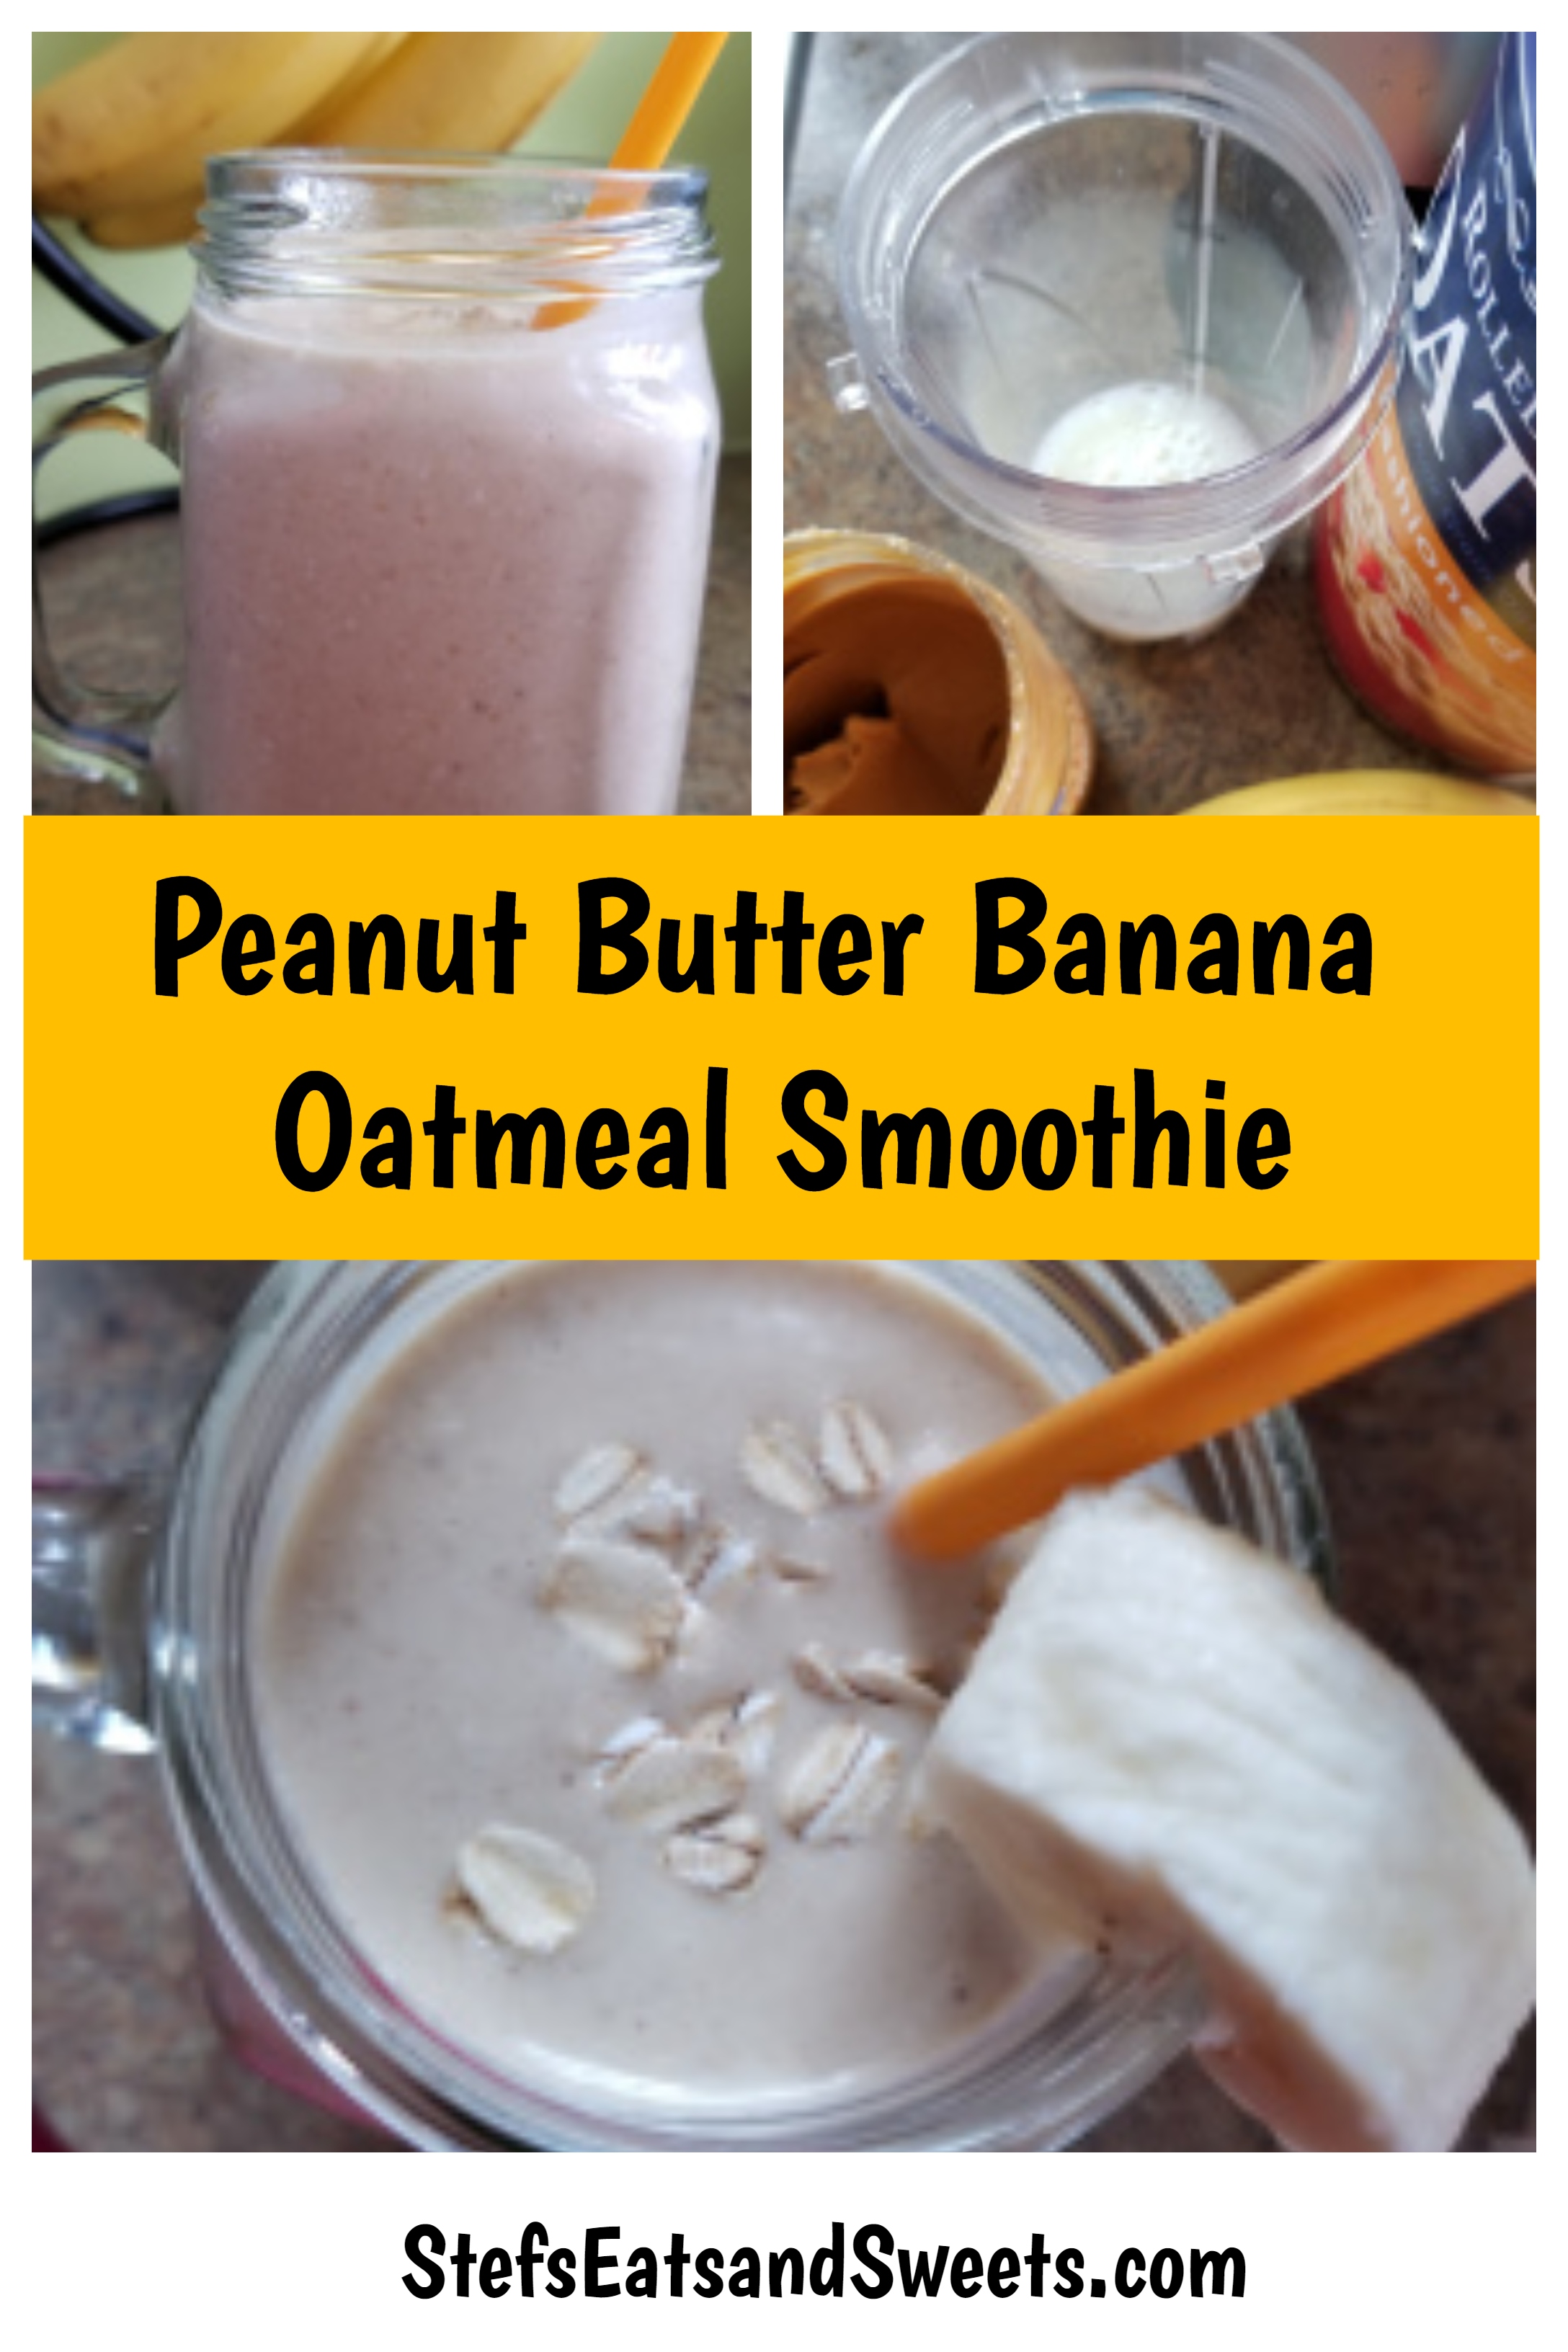 Peanut Butter Banana Oatmeal Smoothie Pinterest collage 2 